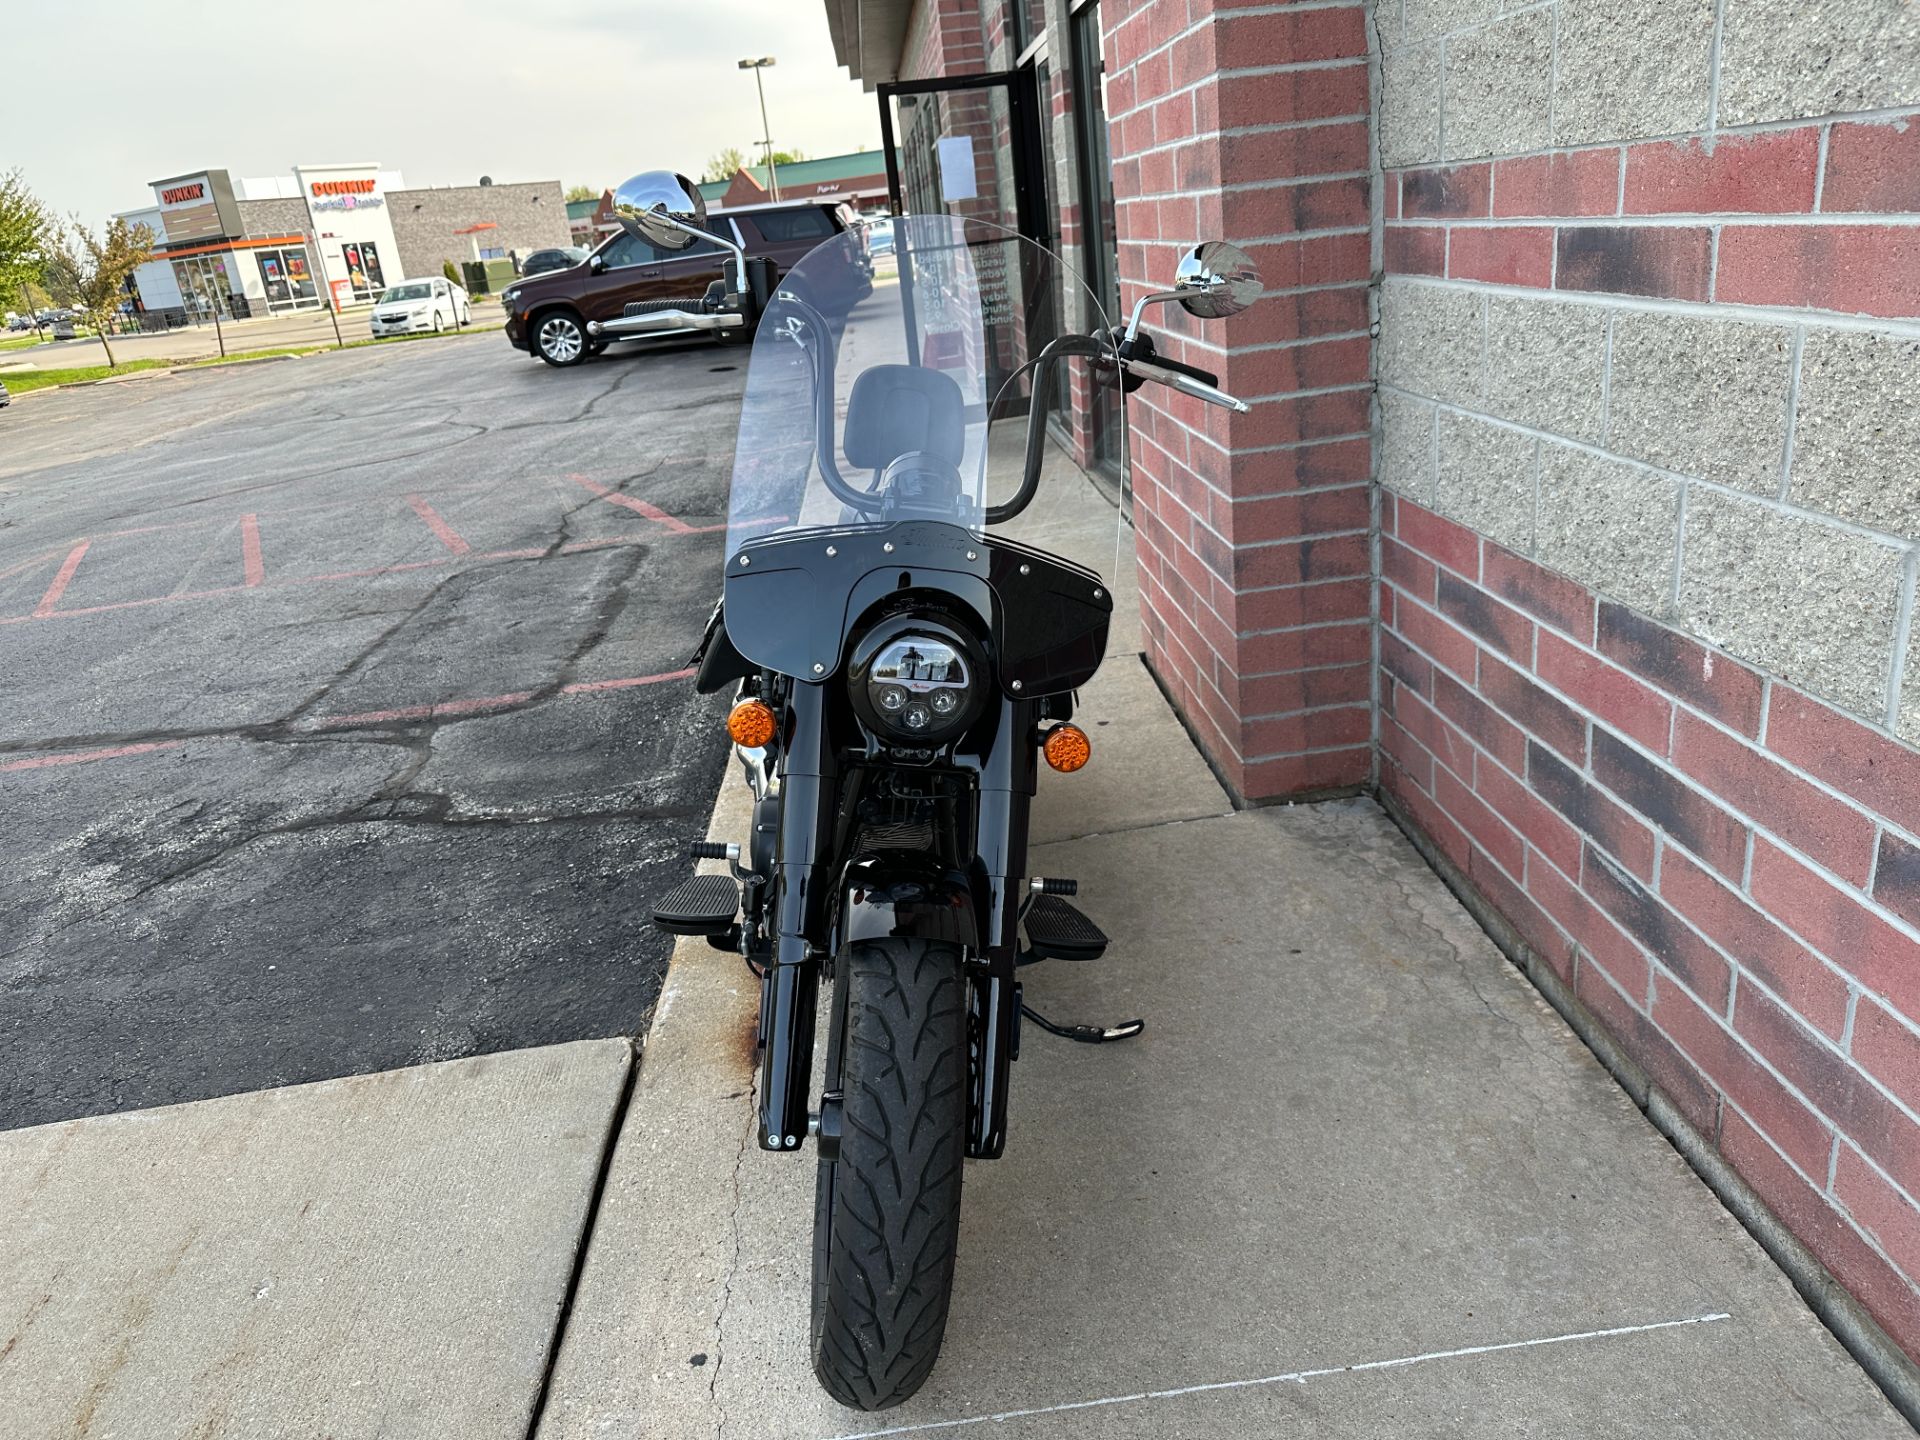 2022 Indian Motorcycle Super Chief in Muskego, Wisconsin - Photo 3